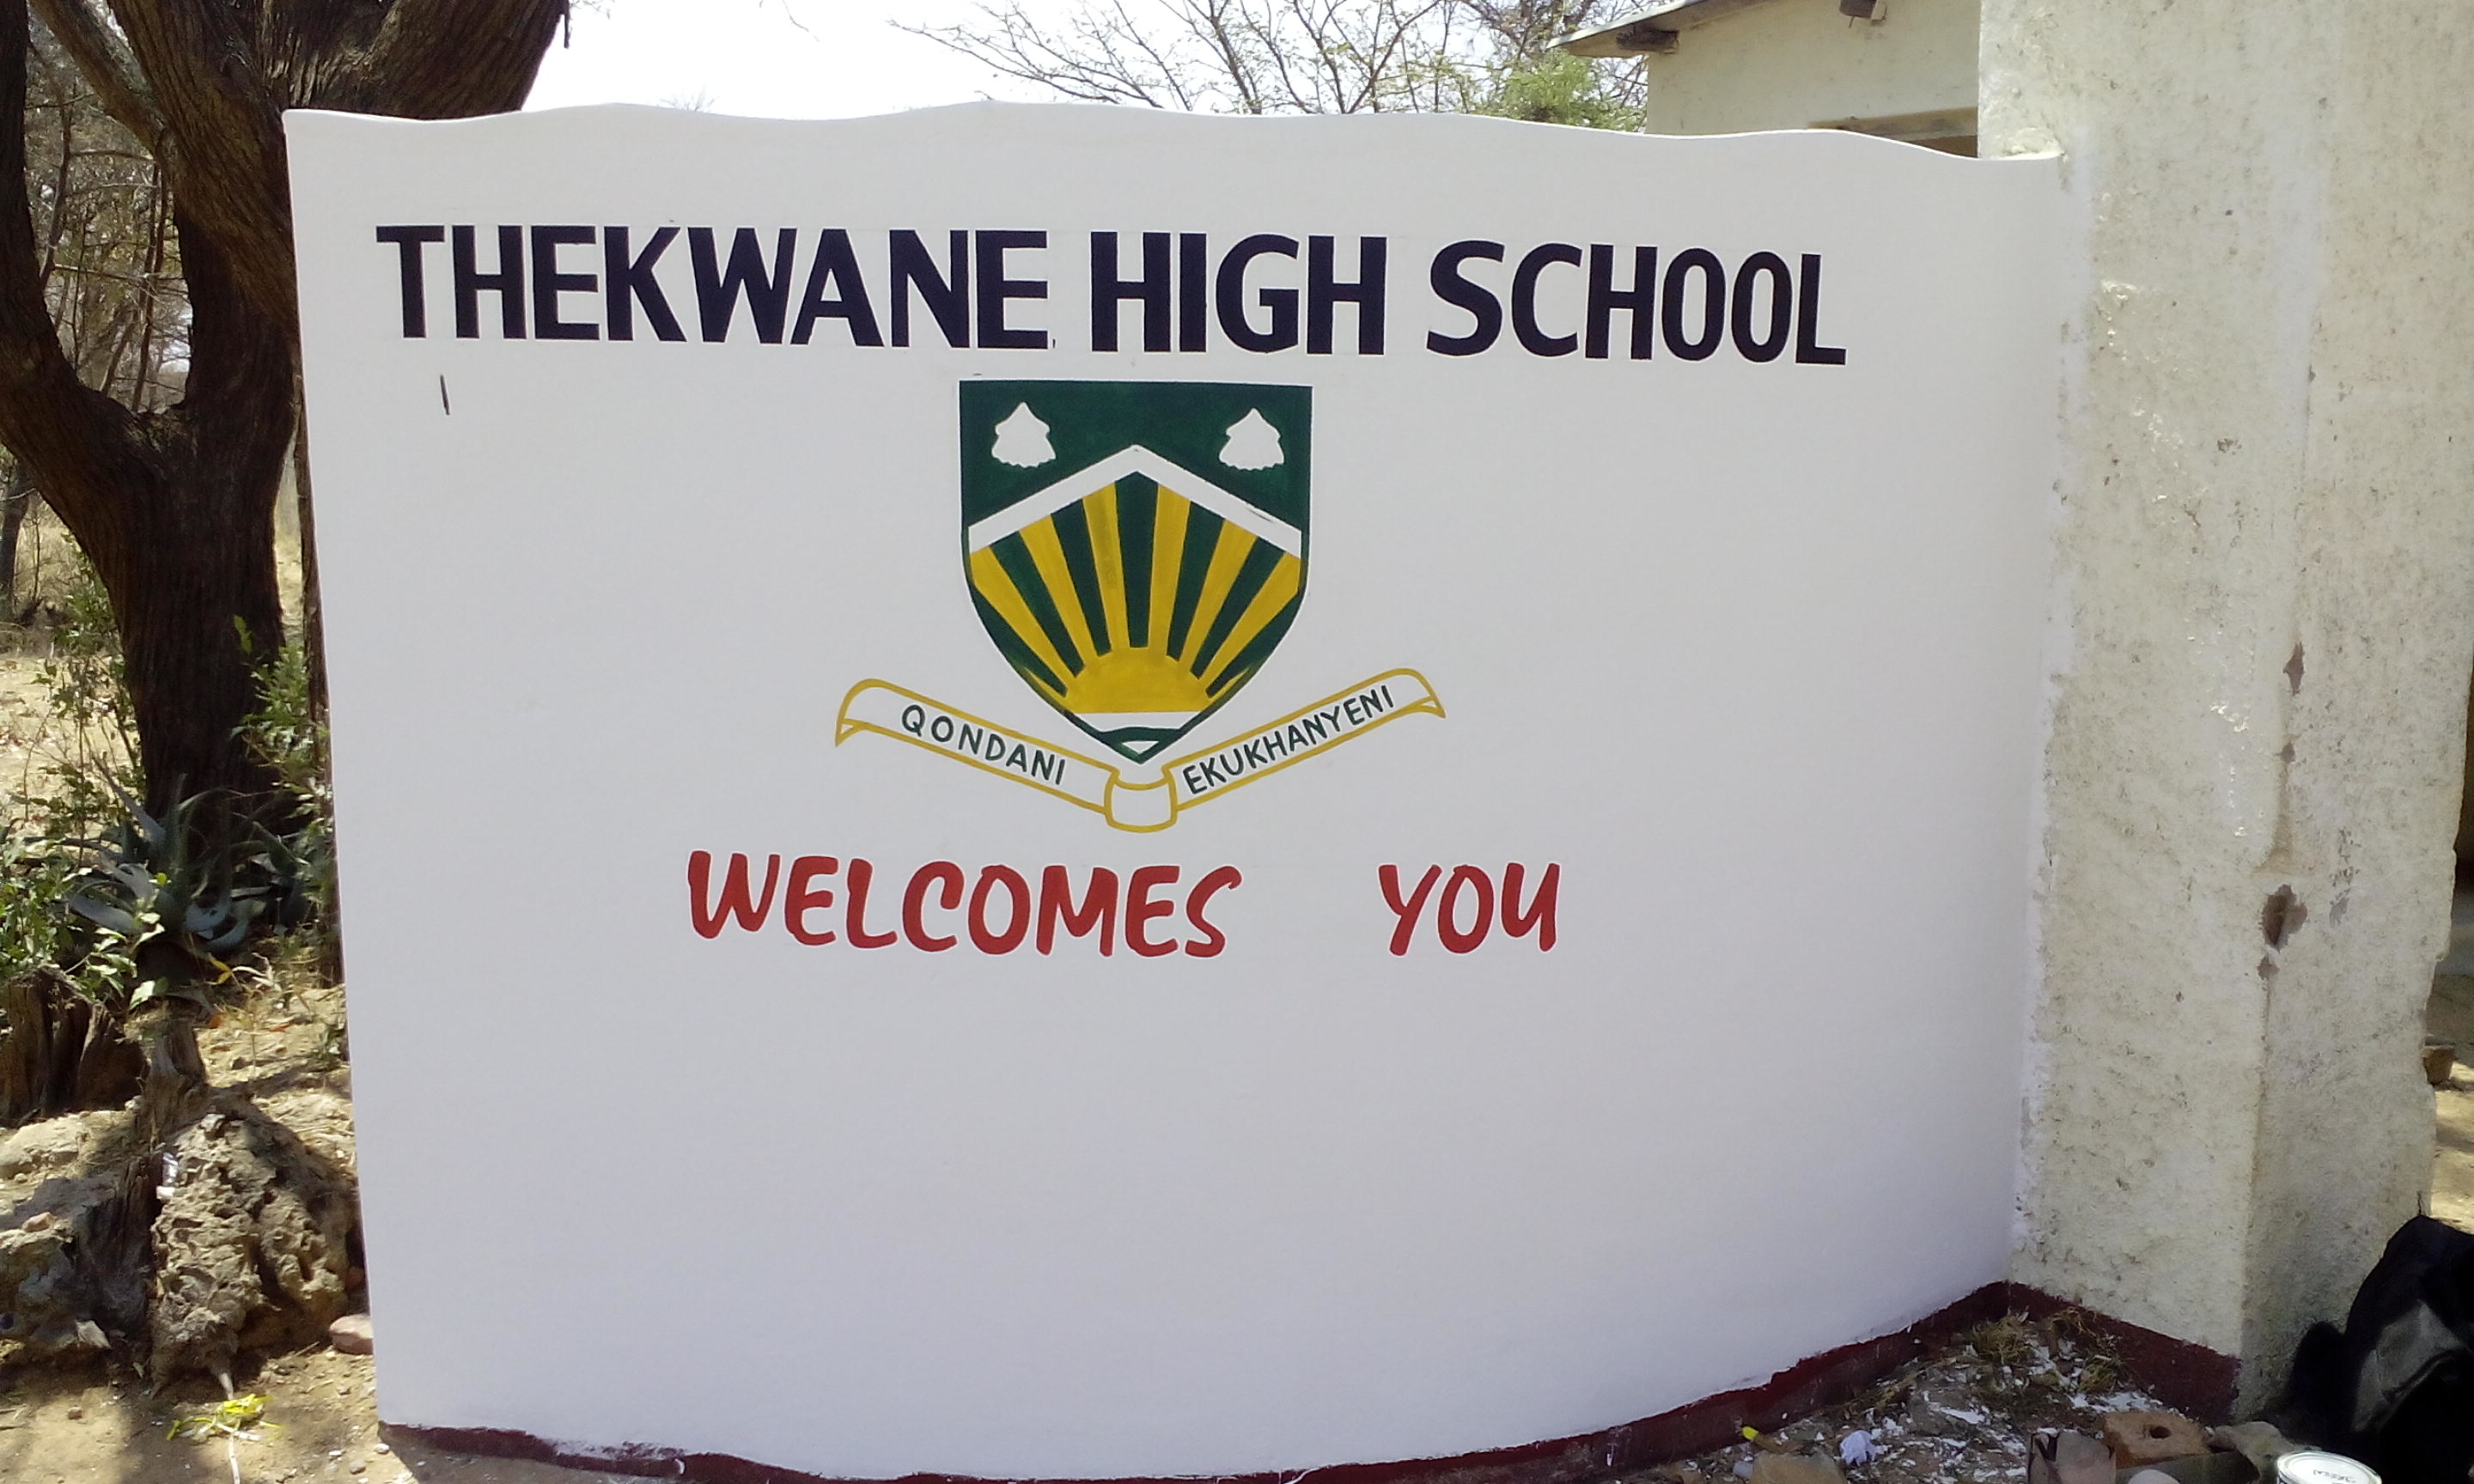 METHODIST Church in Zimbabwe in land row with Thekwane villagers over land in Plumtree and accused of practising ‘black apartheid’